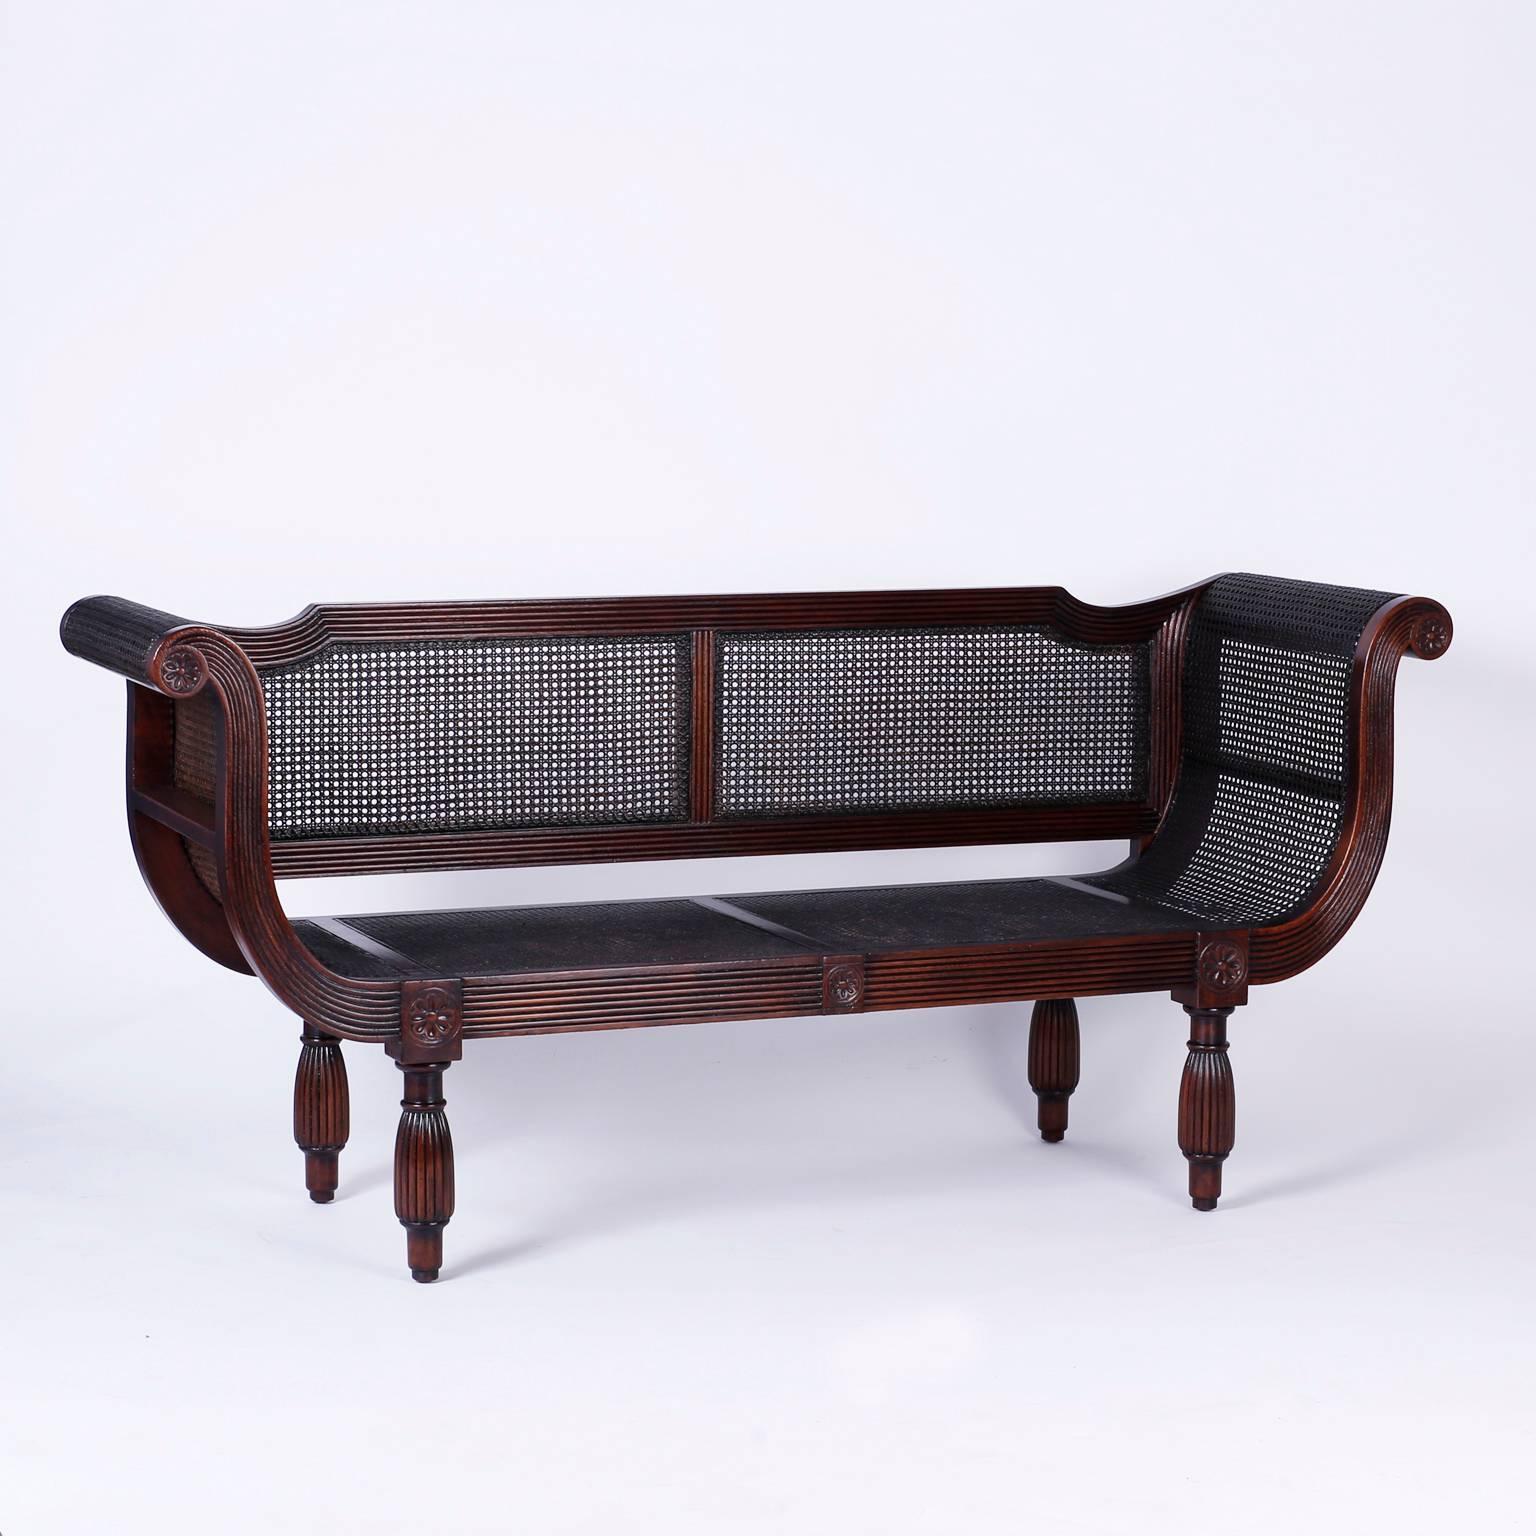 British Colonial or West Indies style sofa crafted with mahogany and having a carved and beaded frame, elegant
scrolled arms, hand caned back, arms, and seat typical of tropical furniture. All supported by turned, beaded legs.